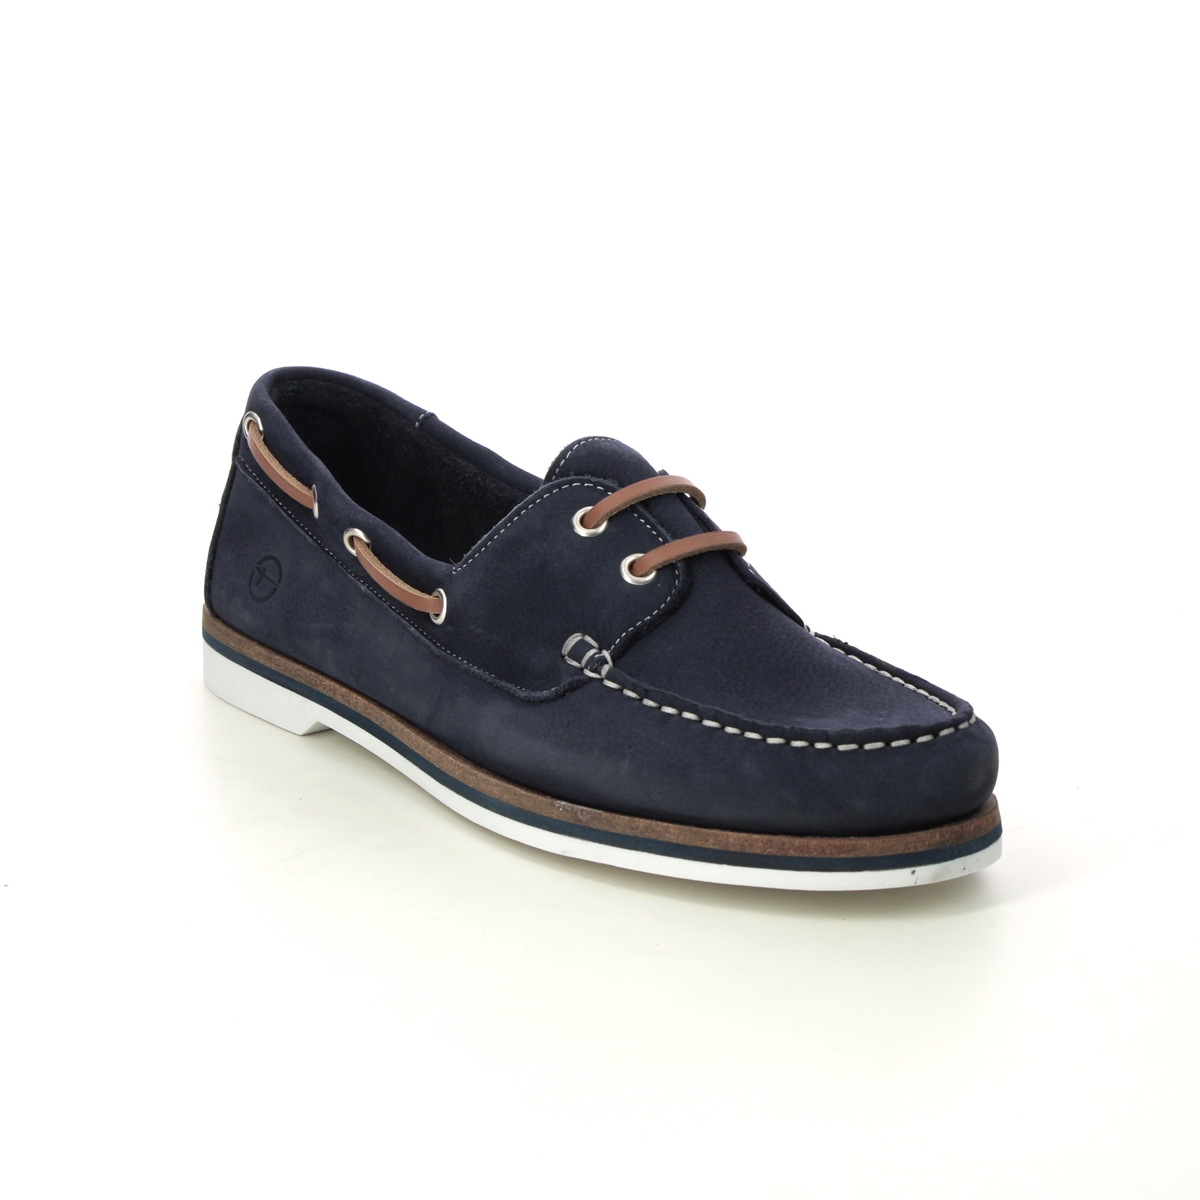 Tamaris Boat Shoe Navy Nubuck Womens loafers 23616-42-805 in a Plain Leather in Size 40